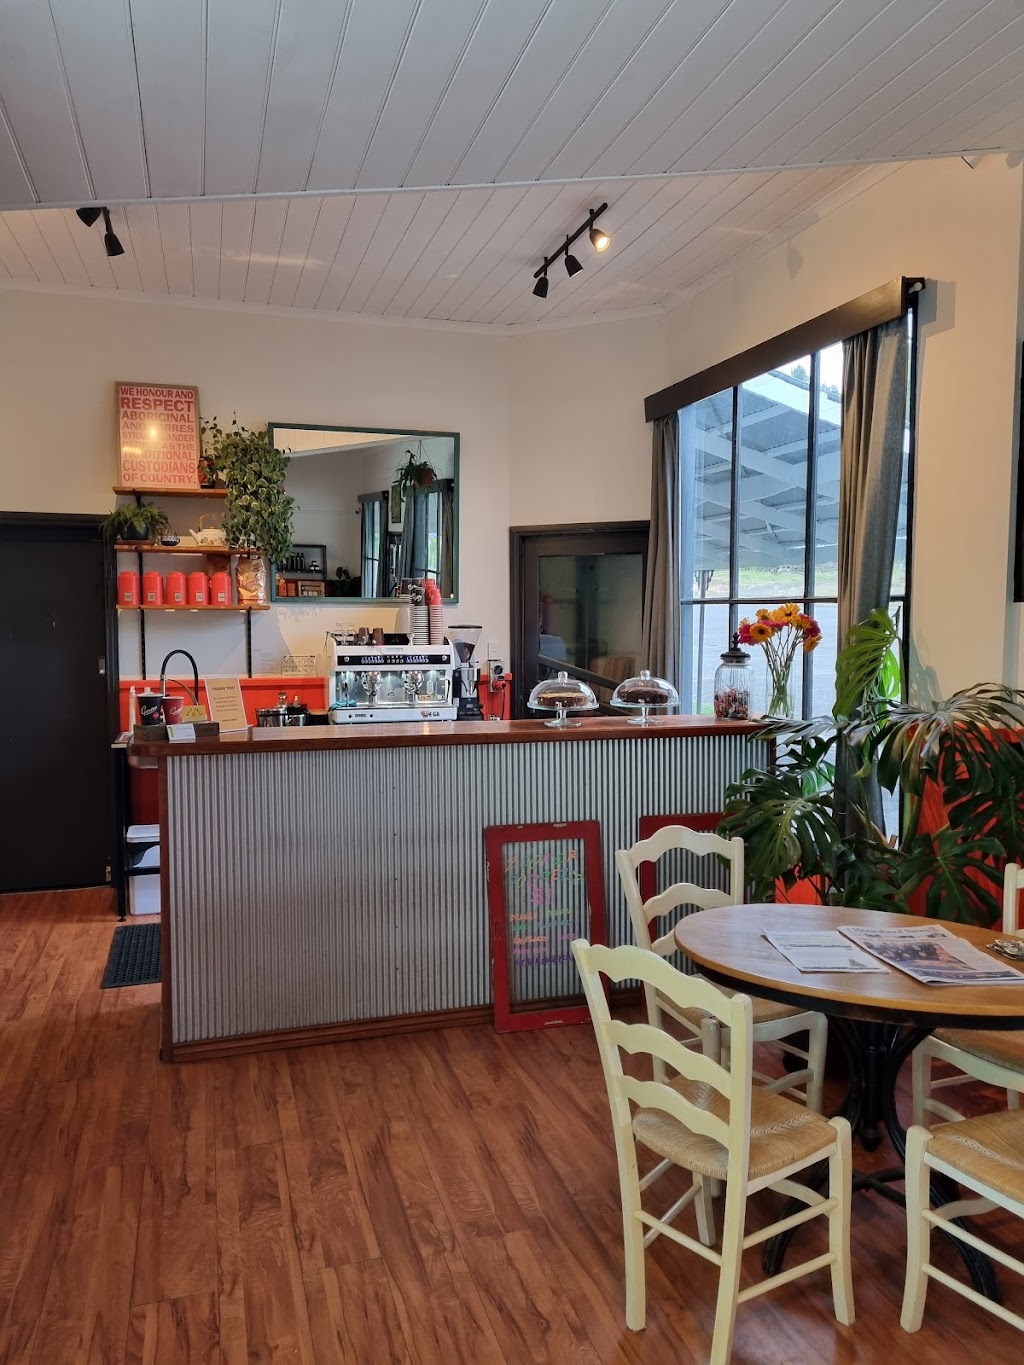 Half Pace General Store | cafe | 65 Main Rd, Mount Egerton VIC 3352, Australia | 0493623081 OR +61 493 623 081